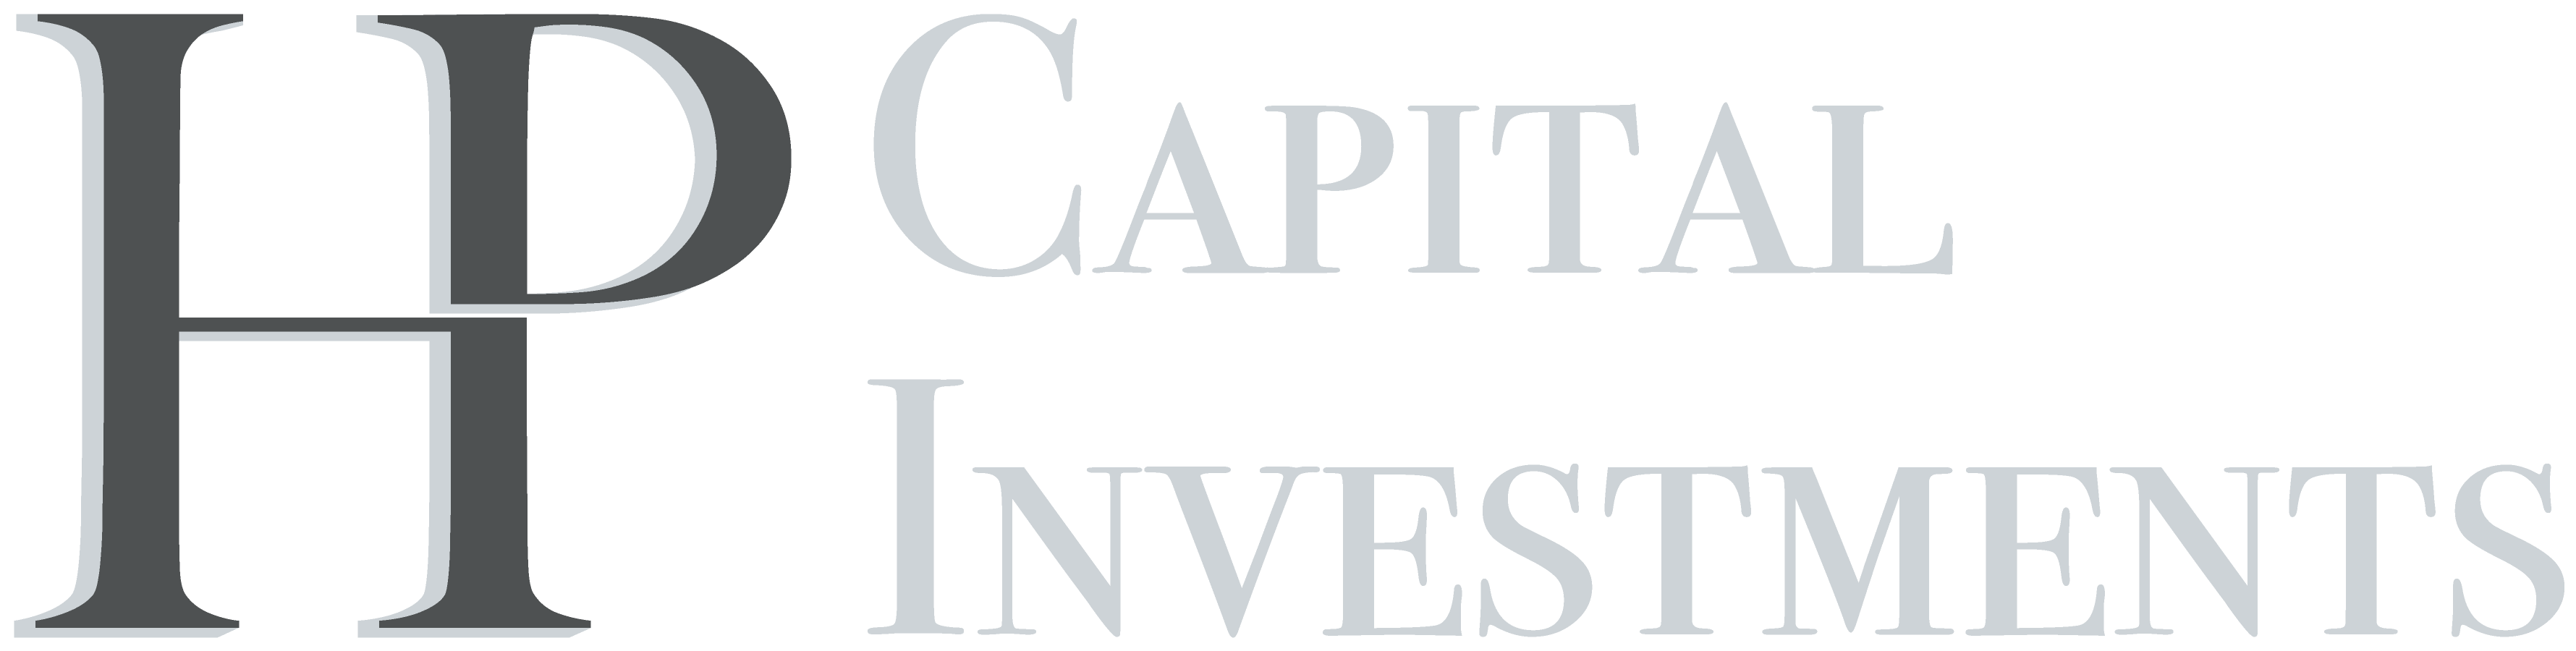 HP Capital Investments